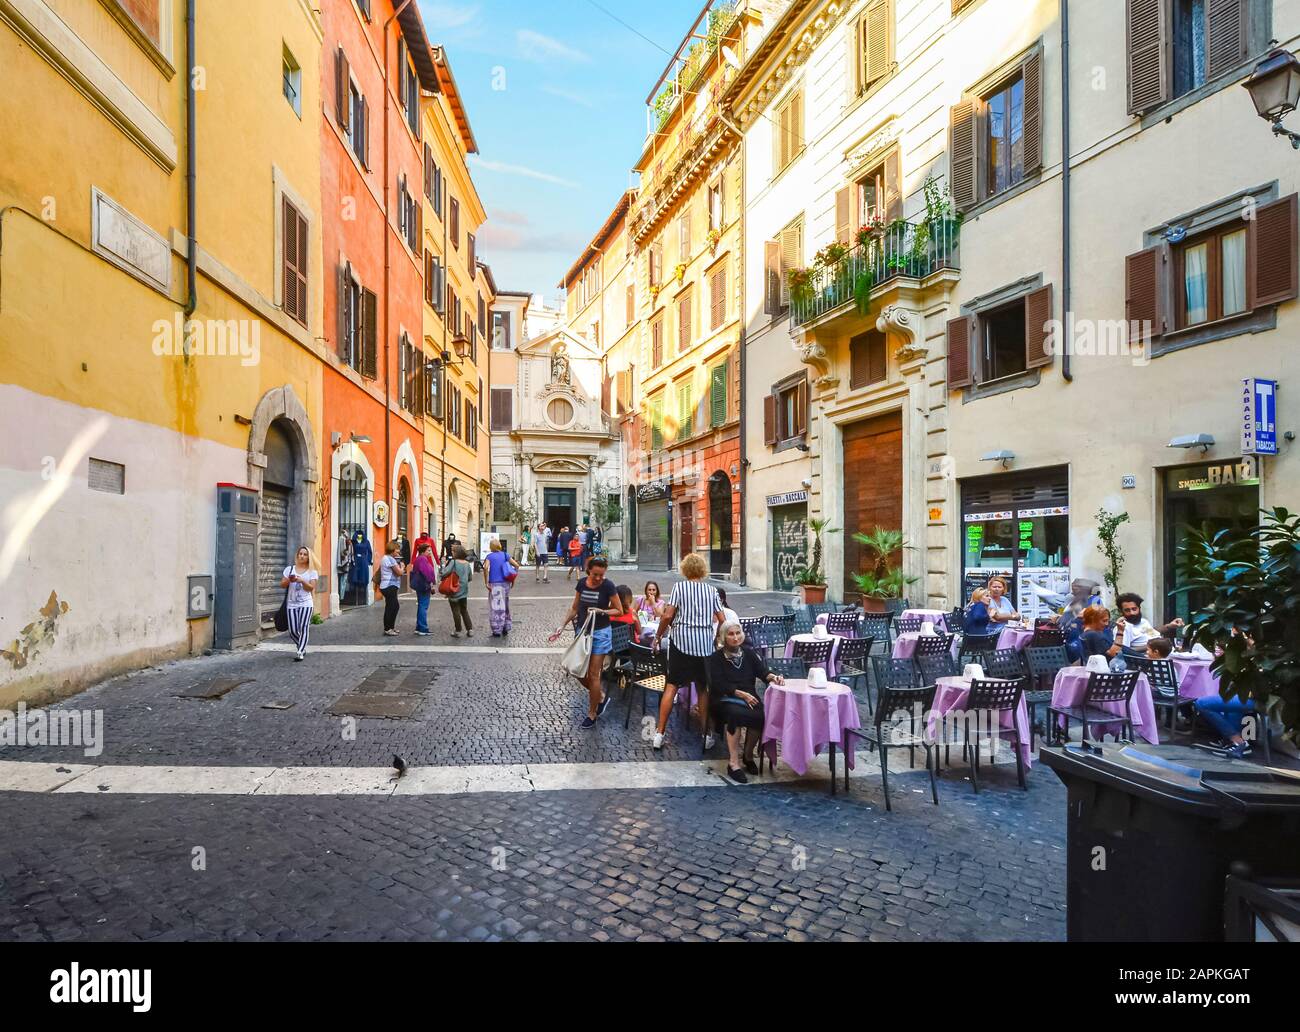 Local Italians including young people and an old woman enjoy a small piazza and cafe in the historic center of Rome, Italy. Stock Photo